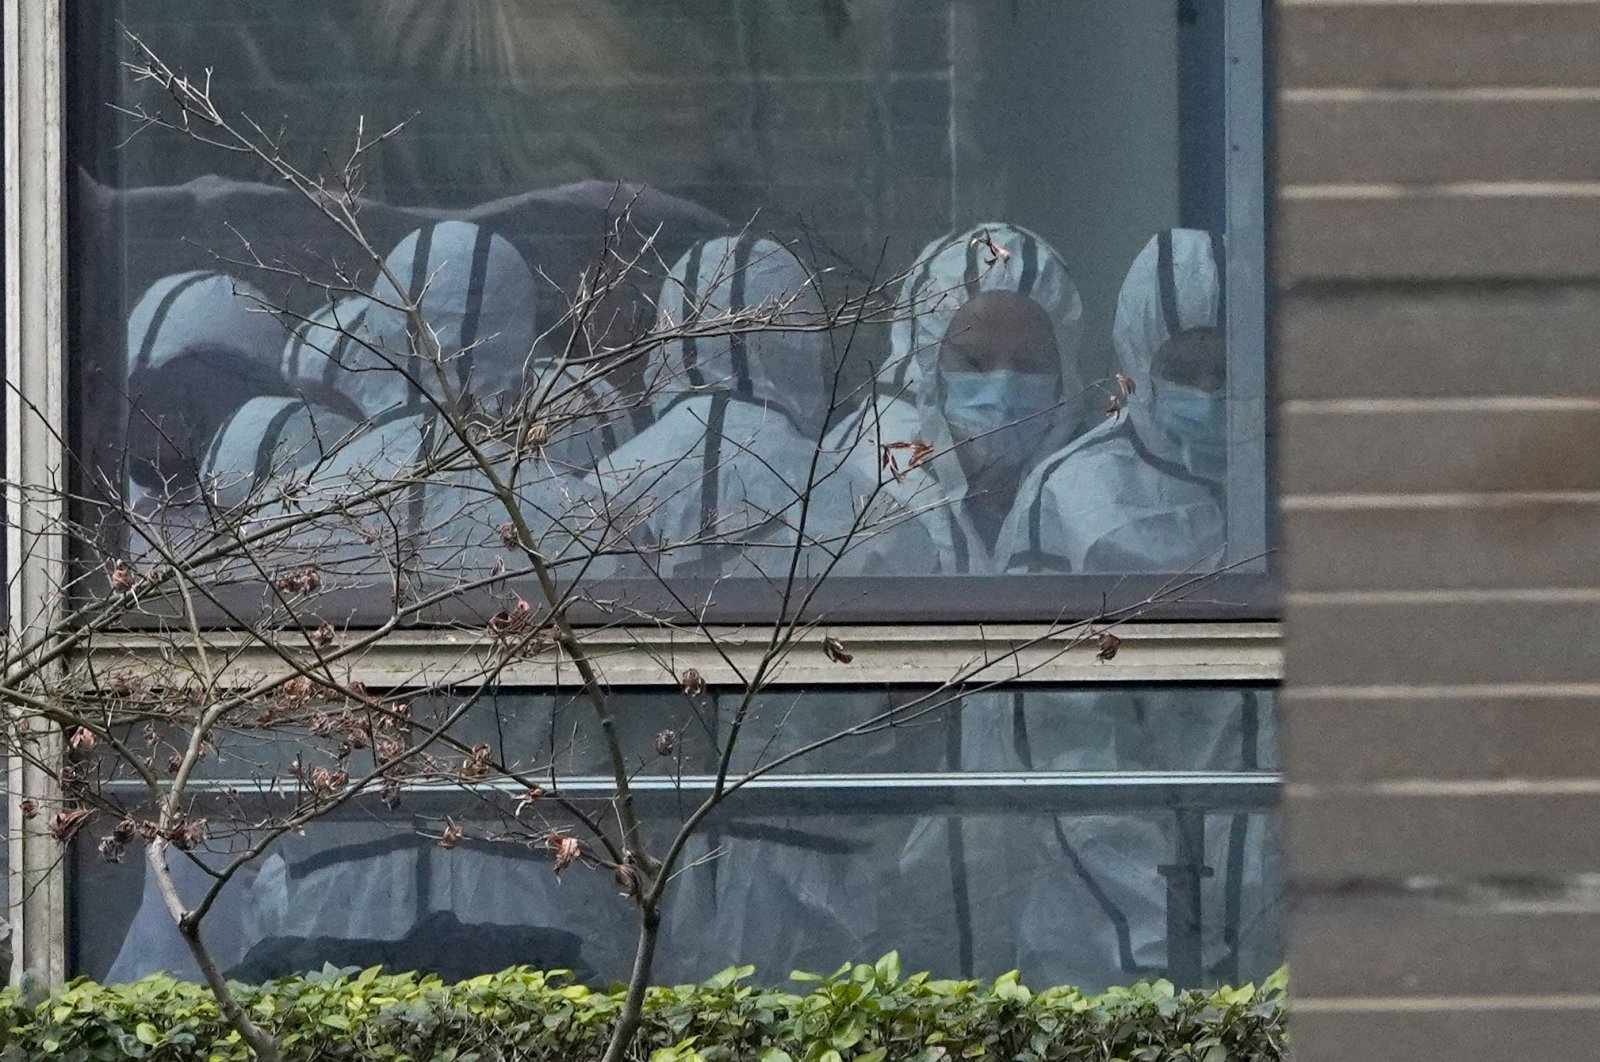 Members of a World Health Organization team are seen through a window wearing protective gear during a field visit to the Hubei Animal Disease Control and Prevention Center for another day of field visit in Wuhan in central China&#039;s Hubei province, Feb. 2, 2021. (AP Photo)